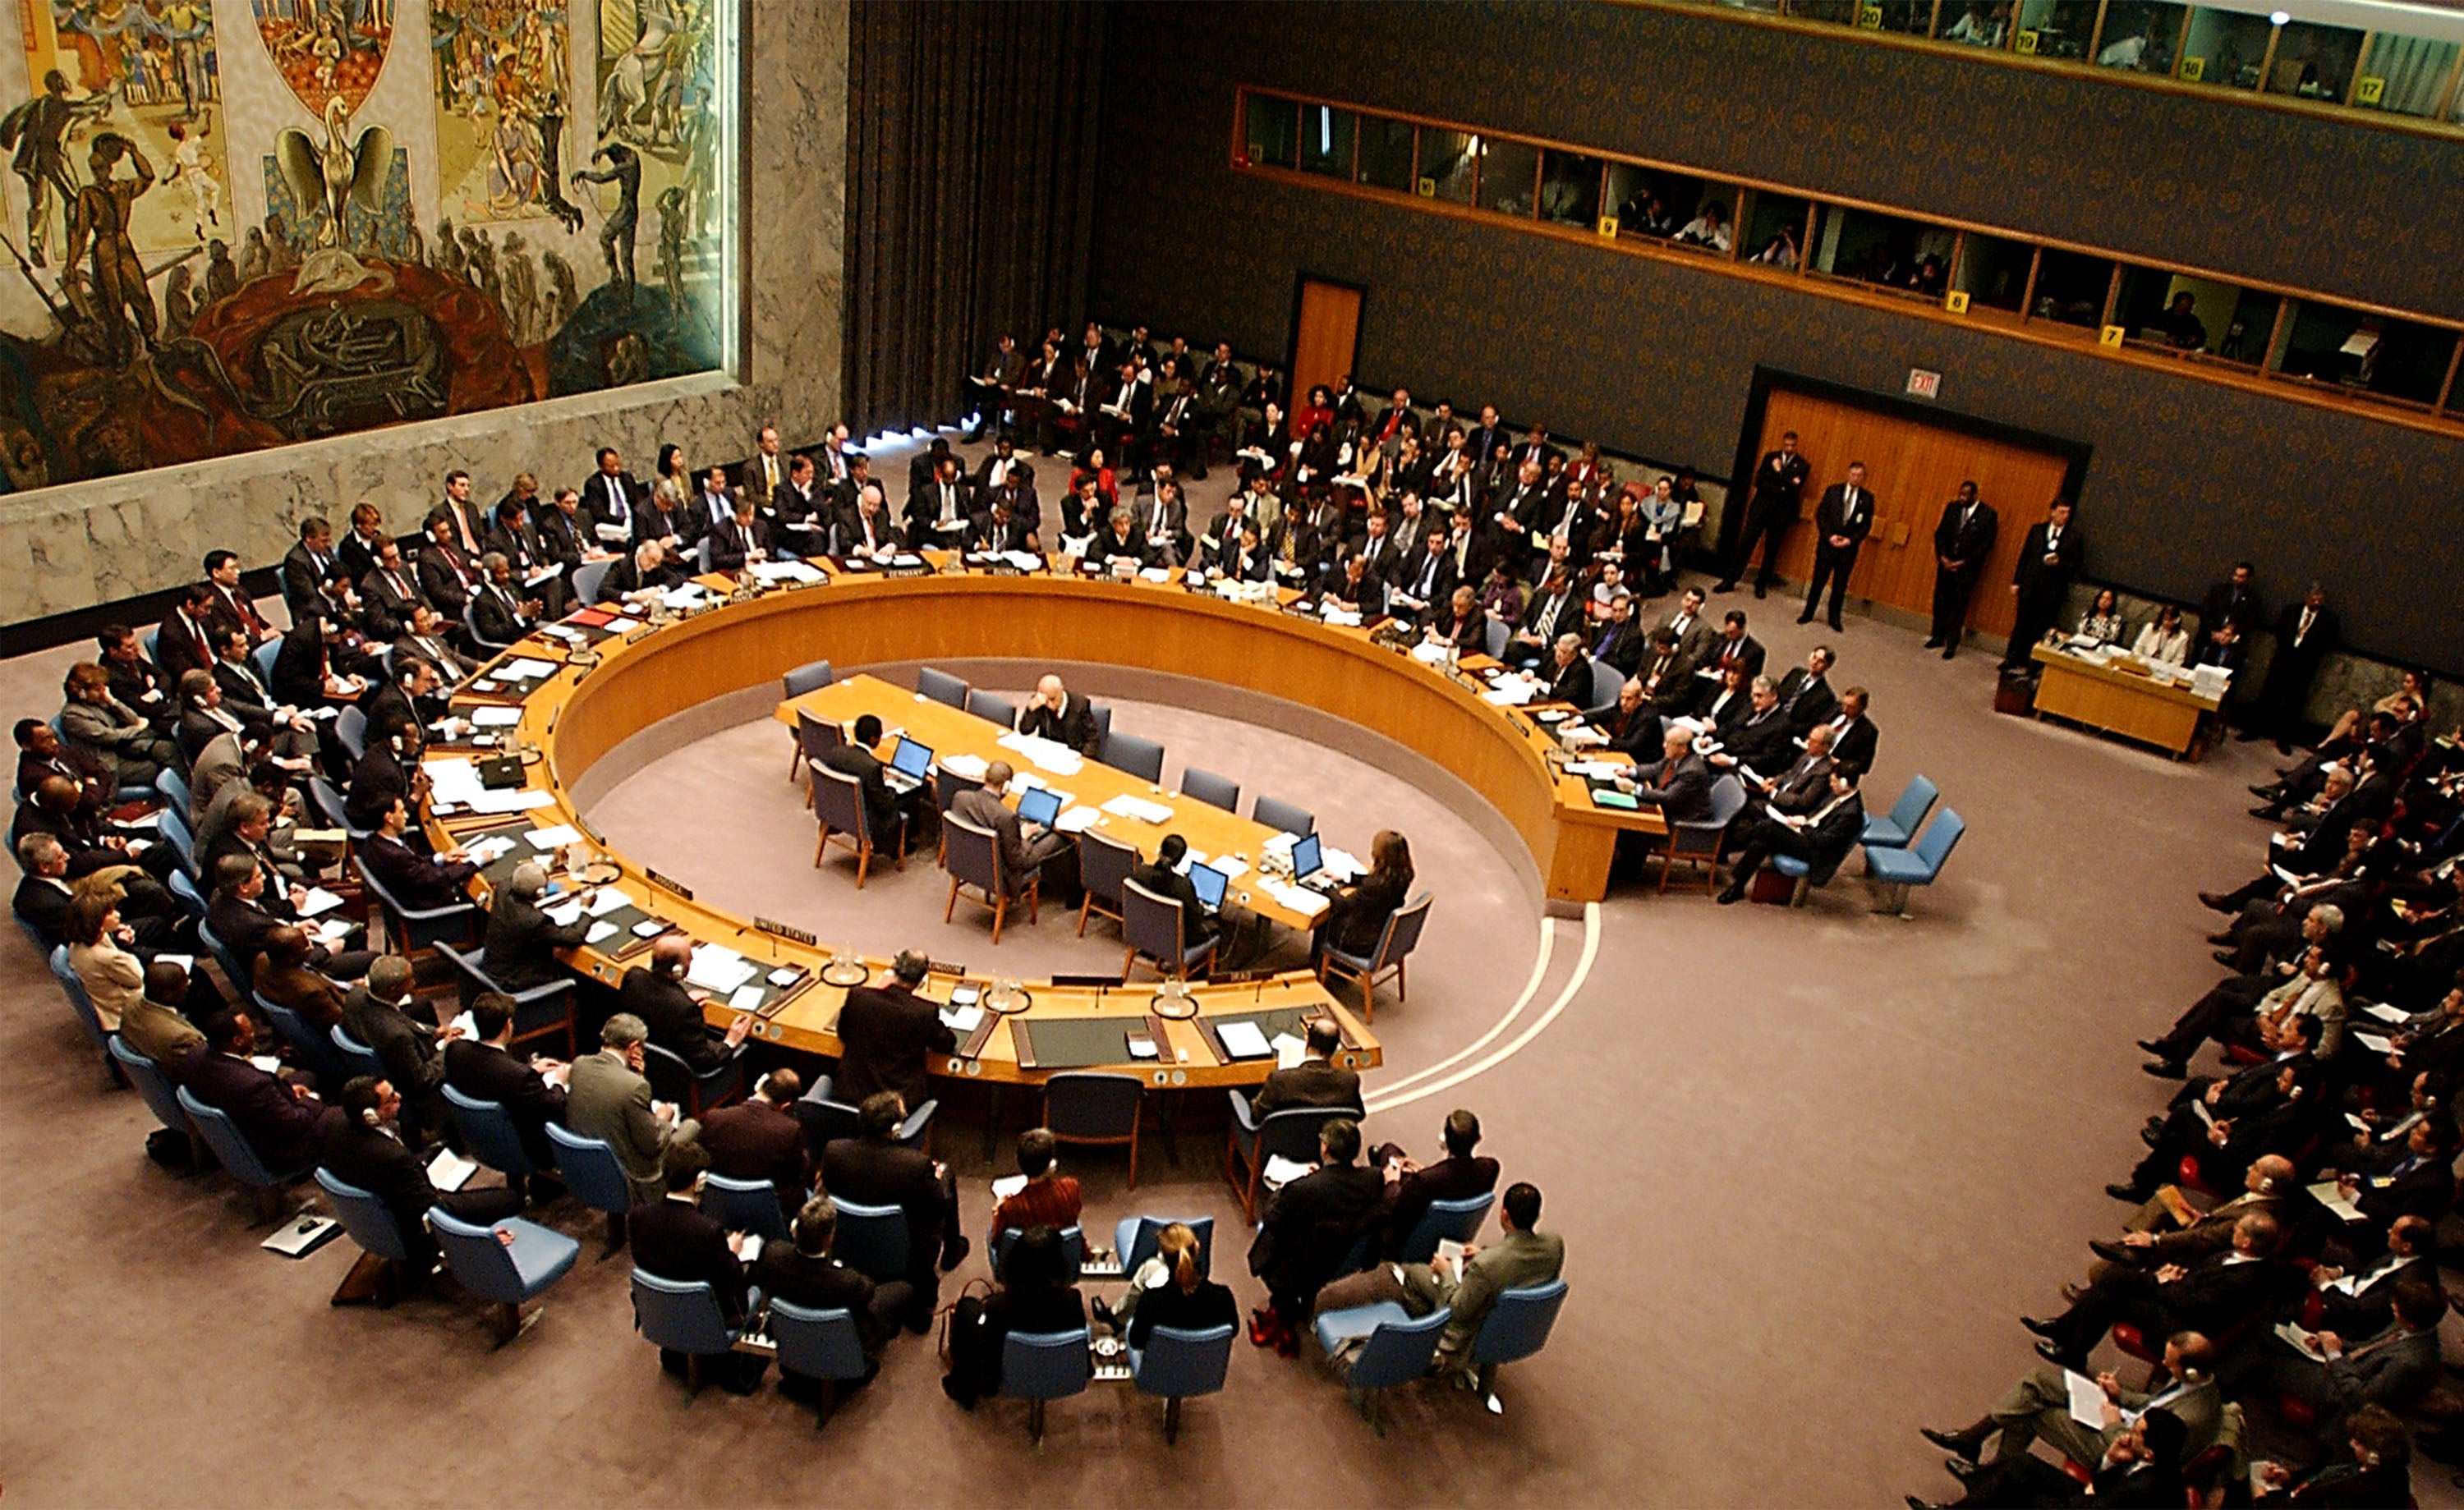 Chief United Nations weapons inspector Hans Blix addresses the UN Security Council on 27 January 2003